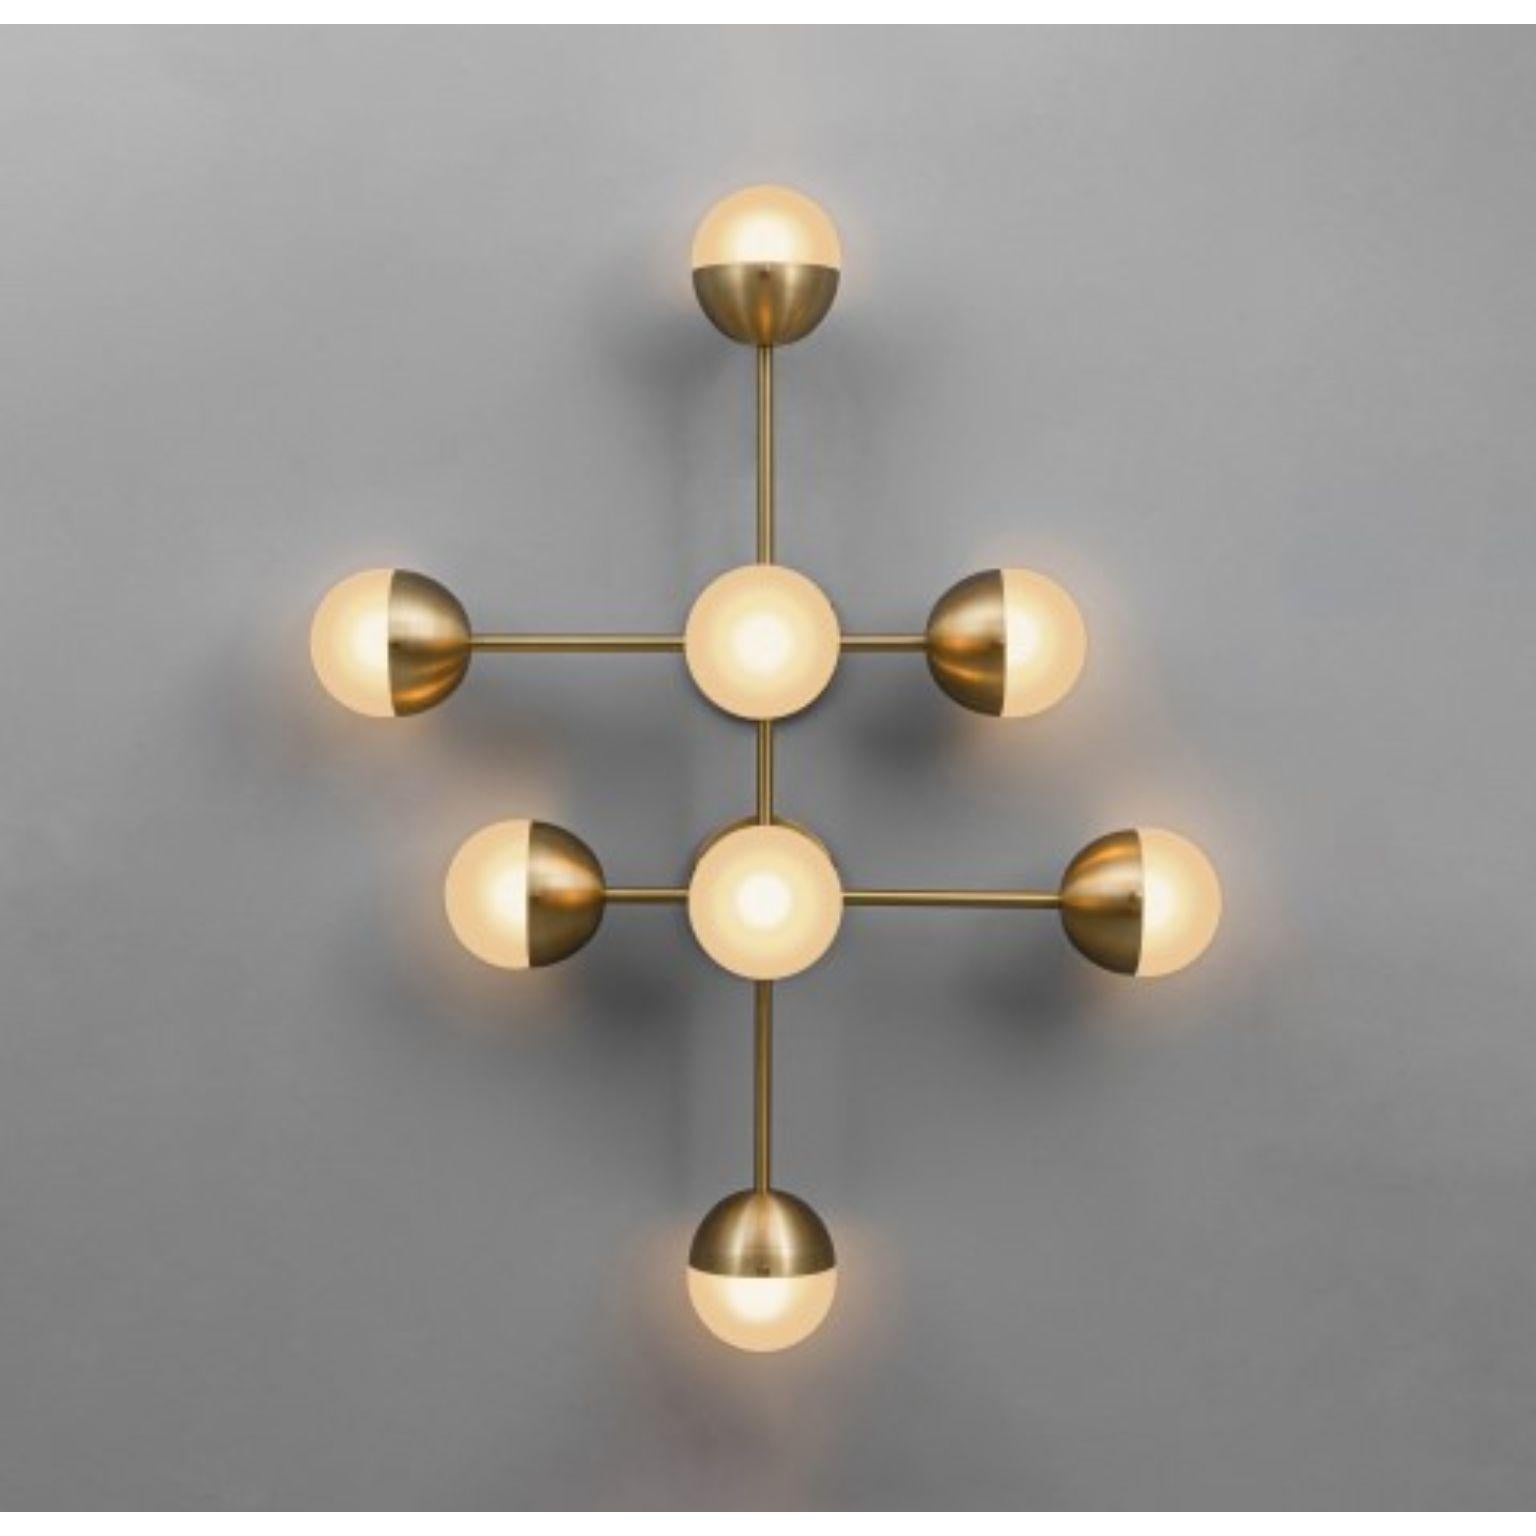 Molecule 8 wall sconce by Schwung
Dimensions: W 73.6 x D 23.4 x H 95.6 cm
Materials: Brass, opal glass
Weight: 6.4kg

Finishes available: Black gunmetal, polished nickel, brass
Other sizes available.

 Schwung is a german word, and loosely